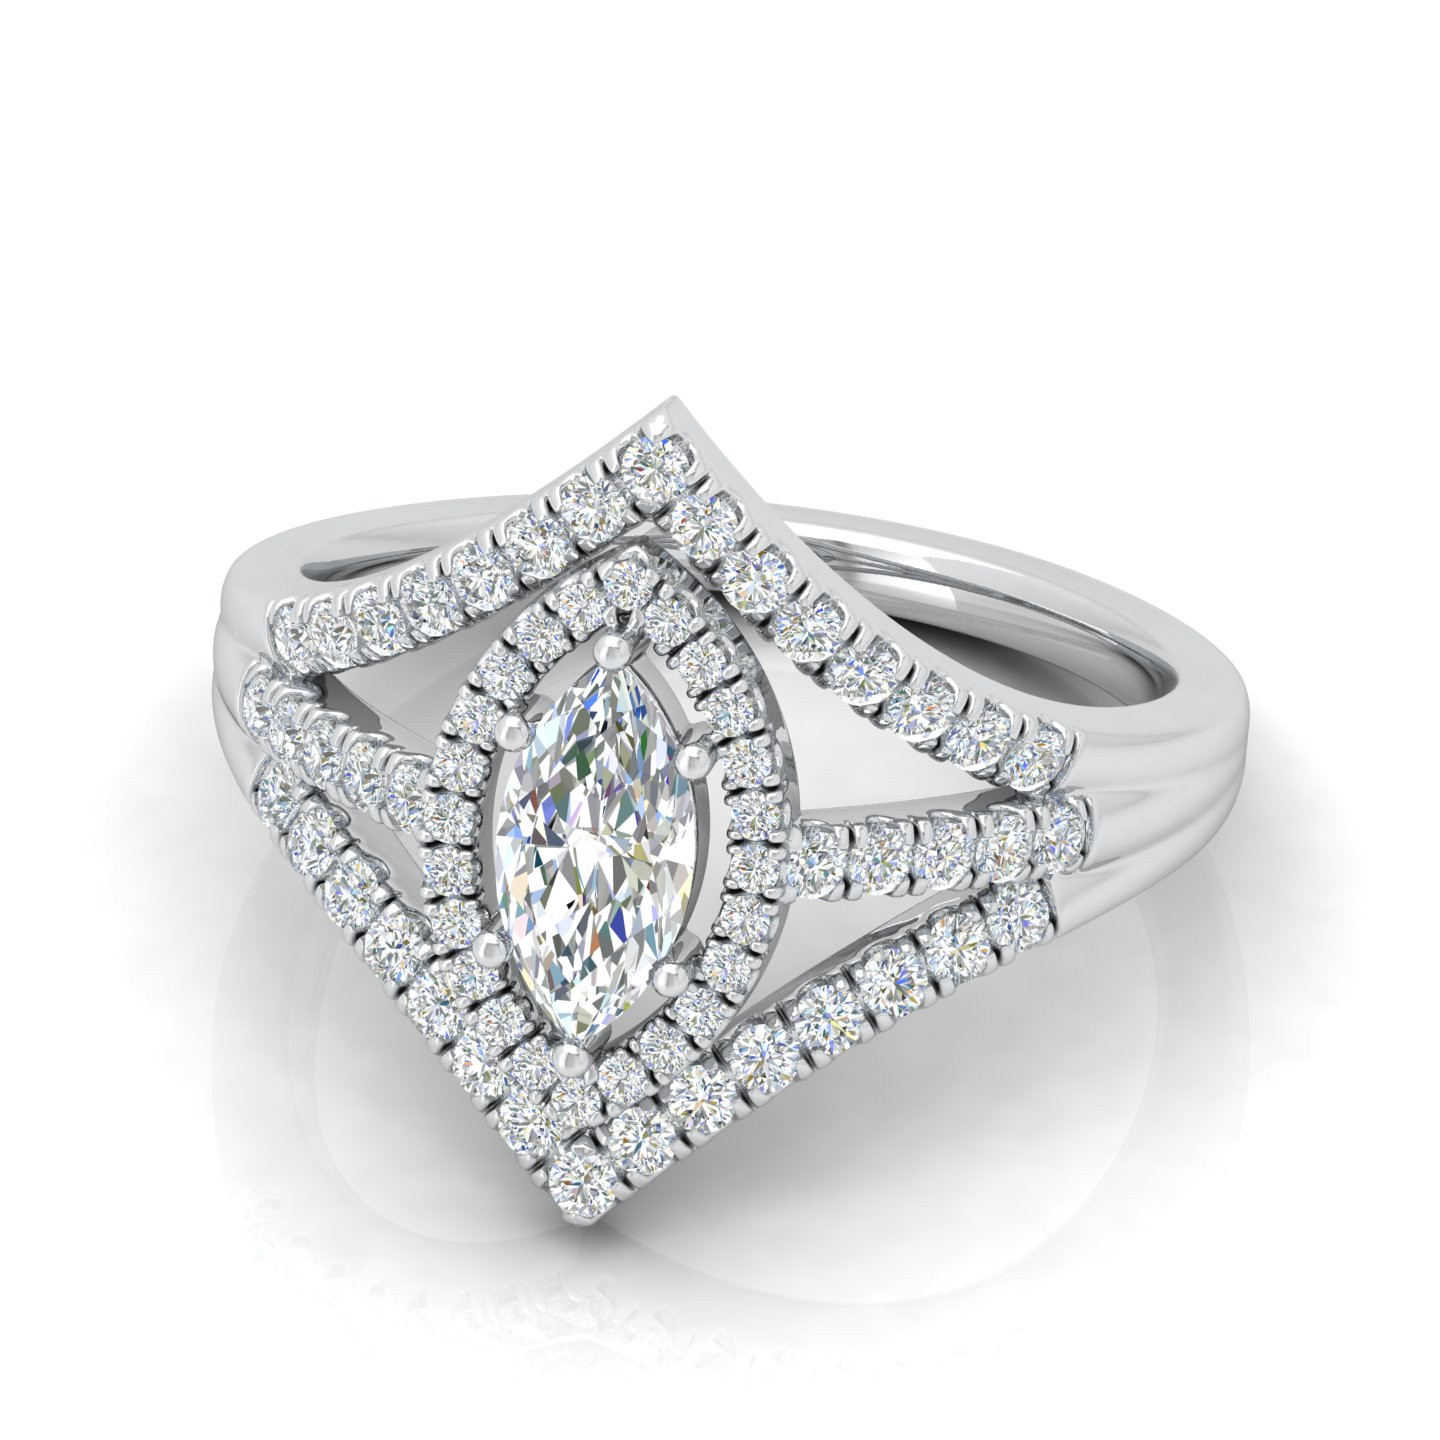 18kt white gold marquise Diamond engagement ring | E.B. Horn Jewelry